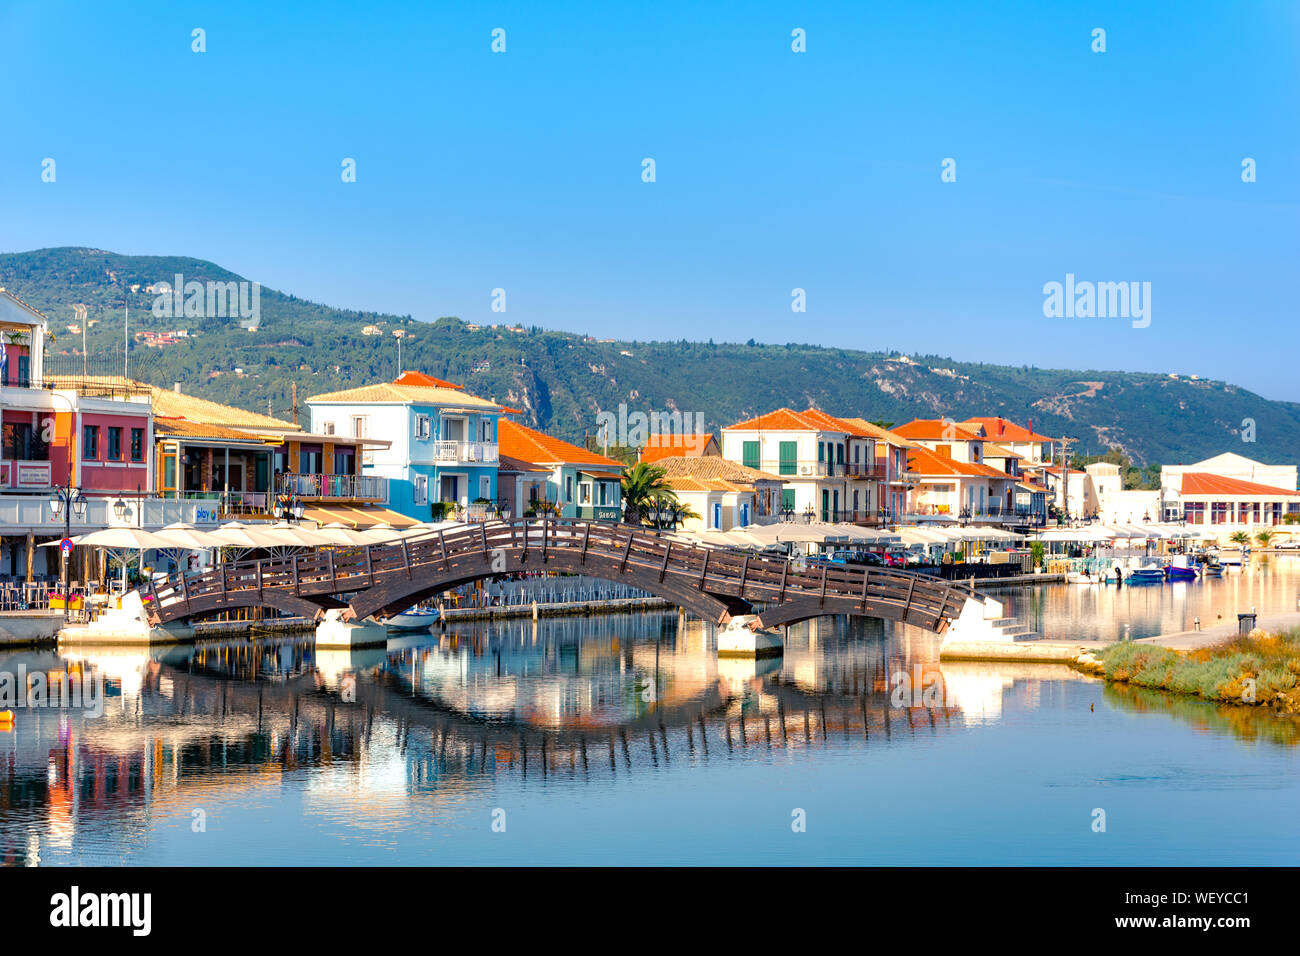 Lefkas (Lefkada) town, amazing view at the small marina for the fishing boats with the nice wooden bridge and promenade, Ionian island, Greece Stock Photo